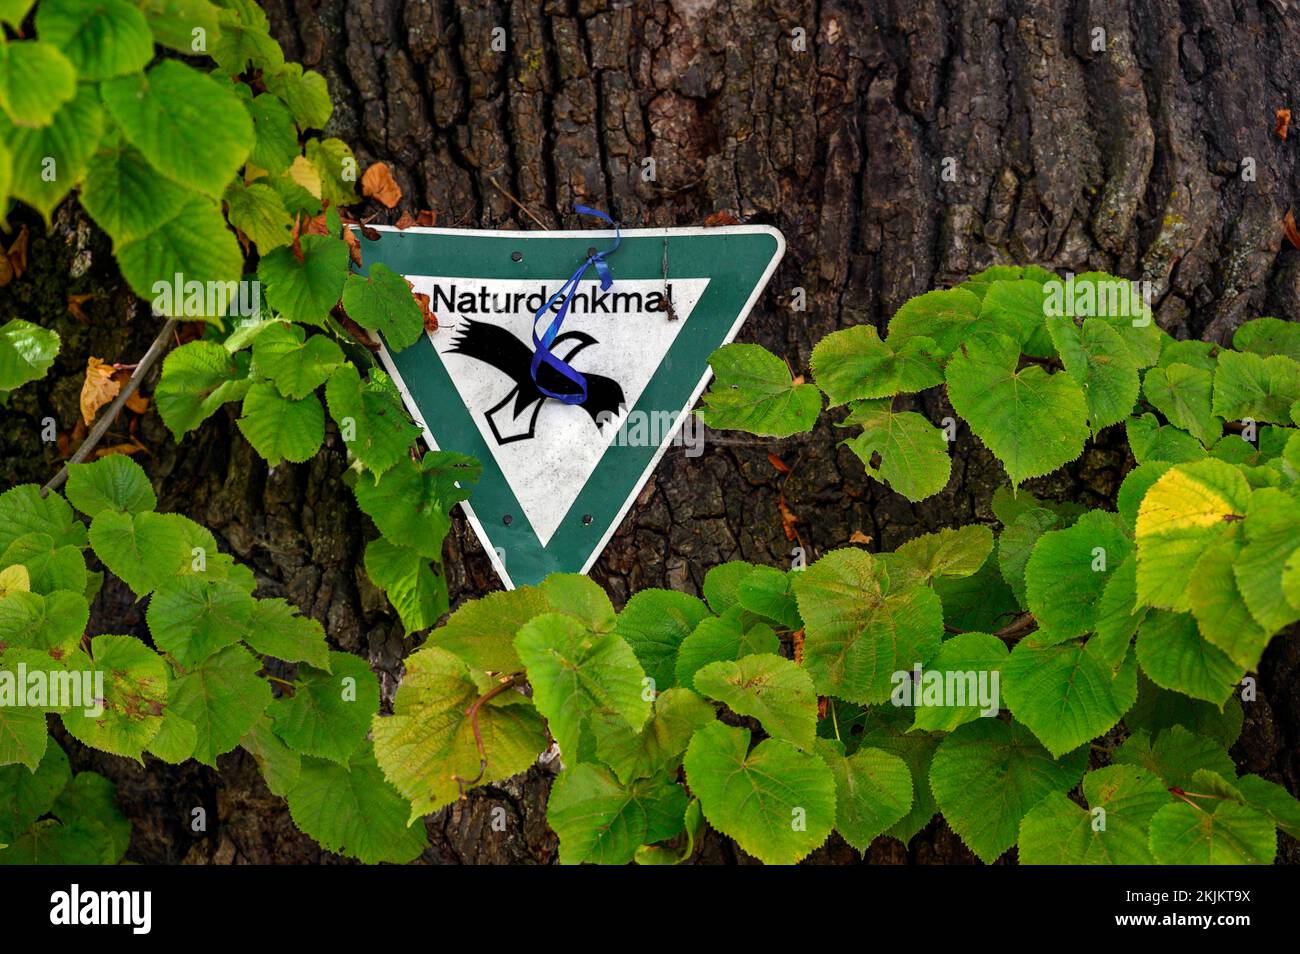 Information sign, natural monument, court lime tree (Tilia), lime tree, in Reicholzried, Allgäu, Bavaria, Germany, Europe Stock Photo